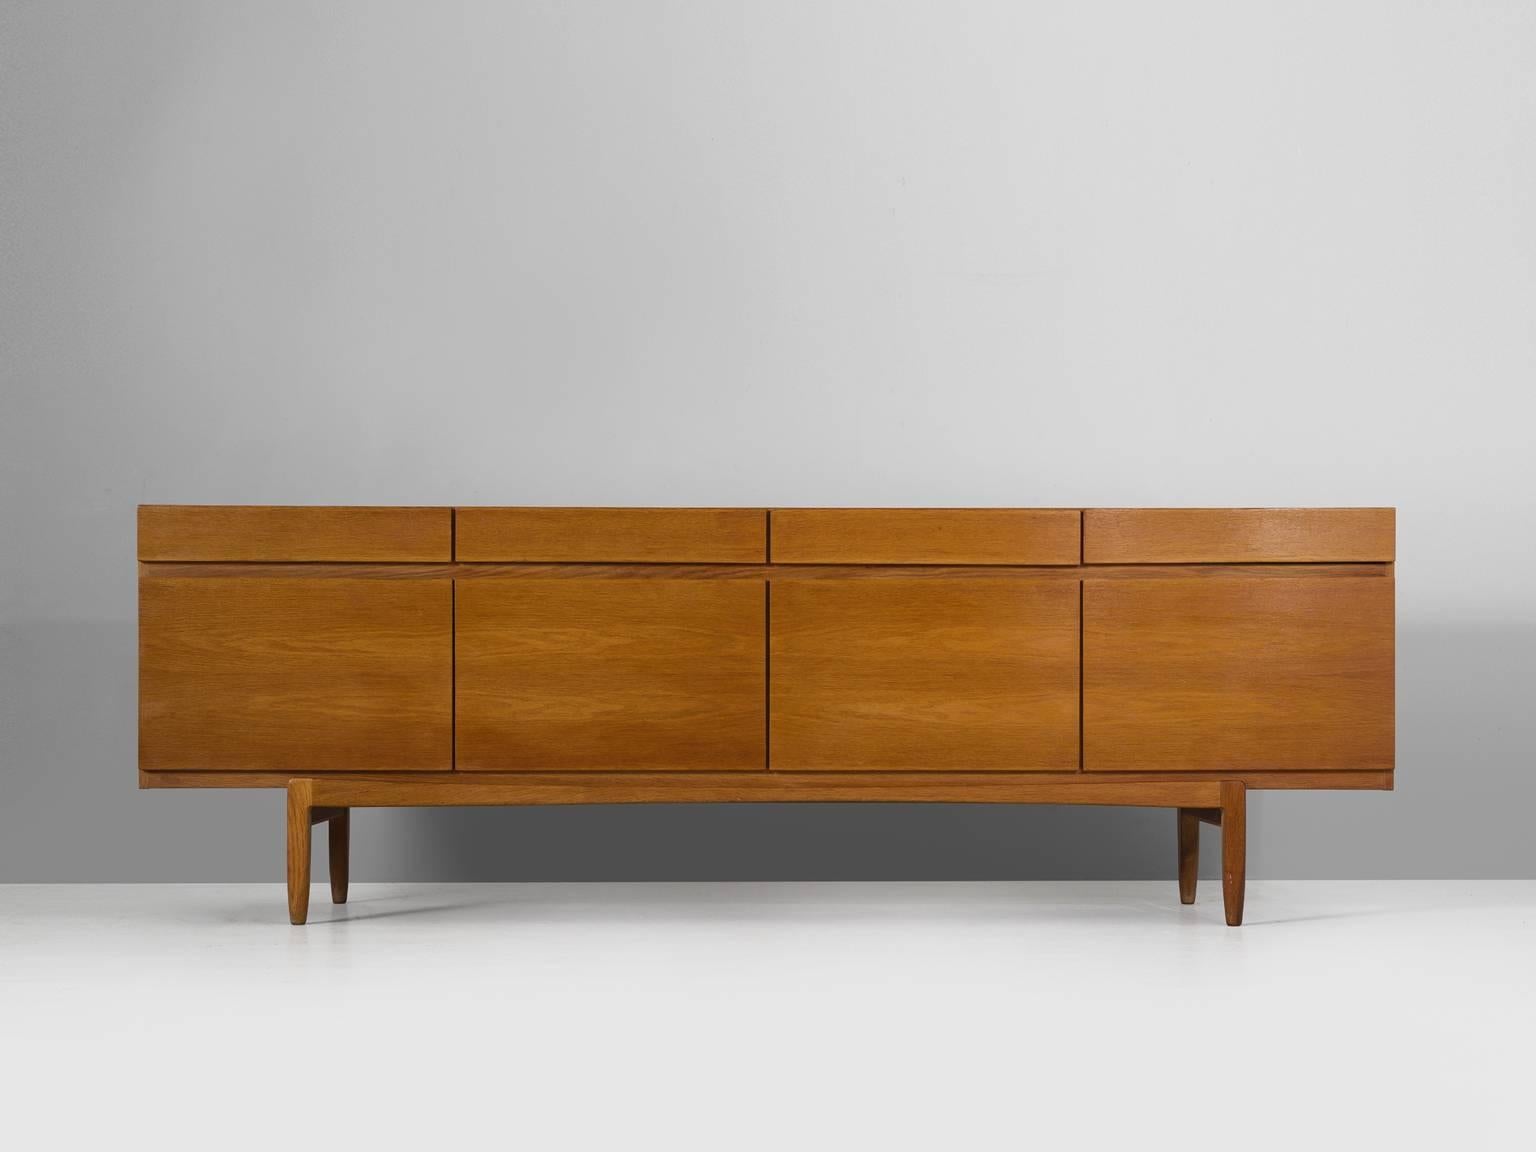 Sideboard model FA66, in oak, by Ib Kofod-Larsen for Faarup Møbelfabrik, Denmark, 1960s.

Excellent designed credenza by Ib Kofod-Larsen. The sideboard contains four doors with four drawers directly above it. The inside contains three shelves and